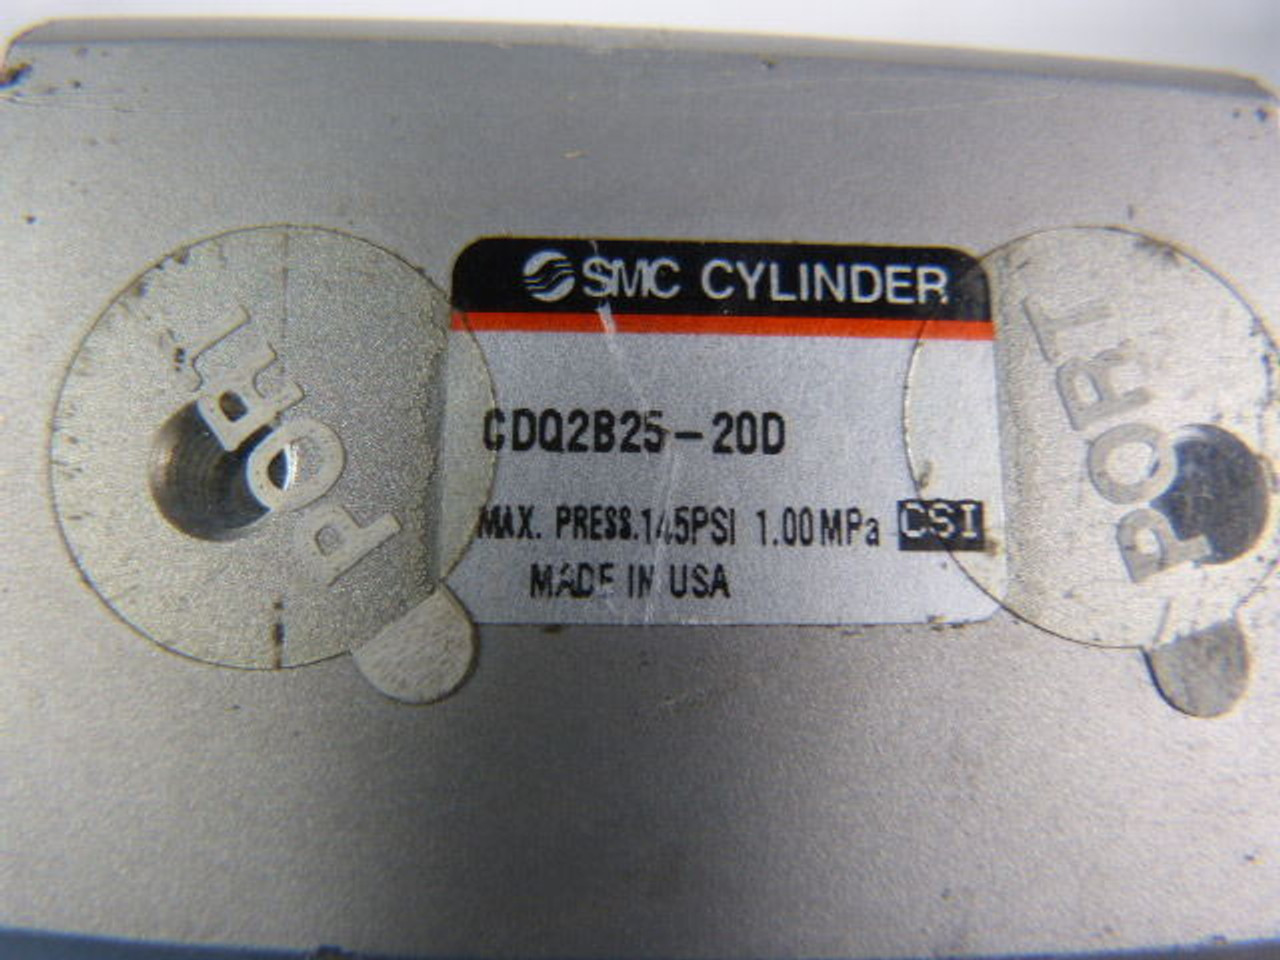 SMC CDQ2B25-20D Pneumatic Compact Cylinder 145 PSI USED